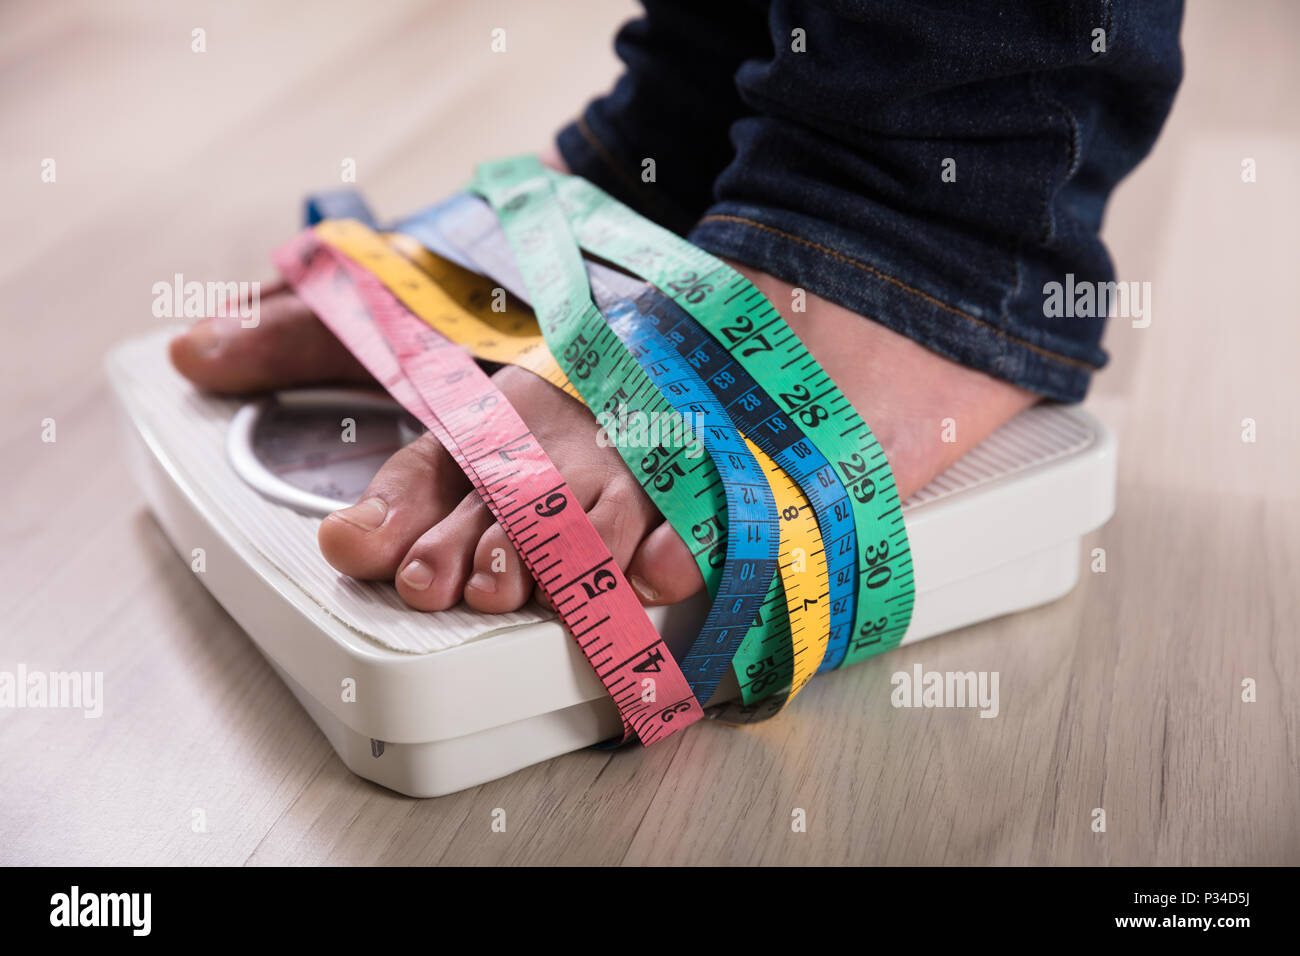 https://c8.alamy.com/comp/P34D5J/close-up-of-a-persons-feet-on-weight-scale-wrapped-with-multi-colored-measuring-tape-P34D5J.jpg